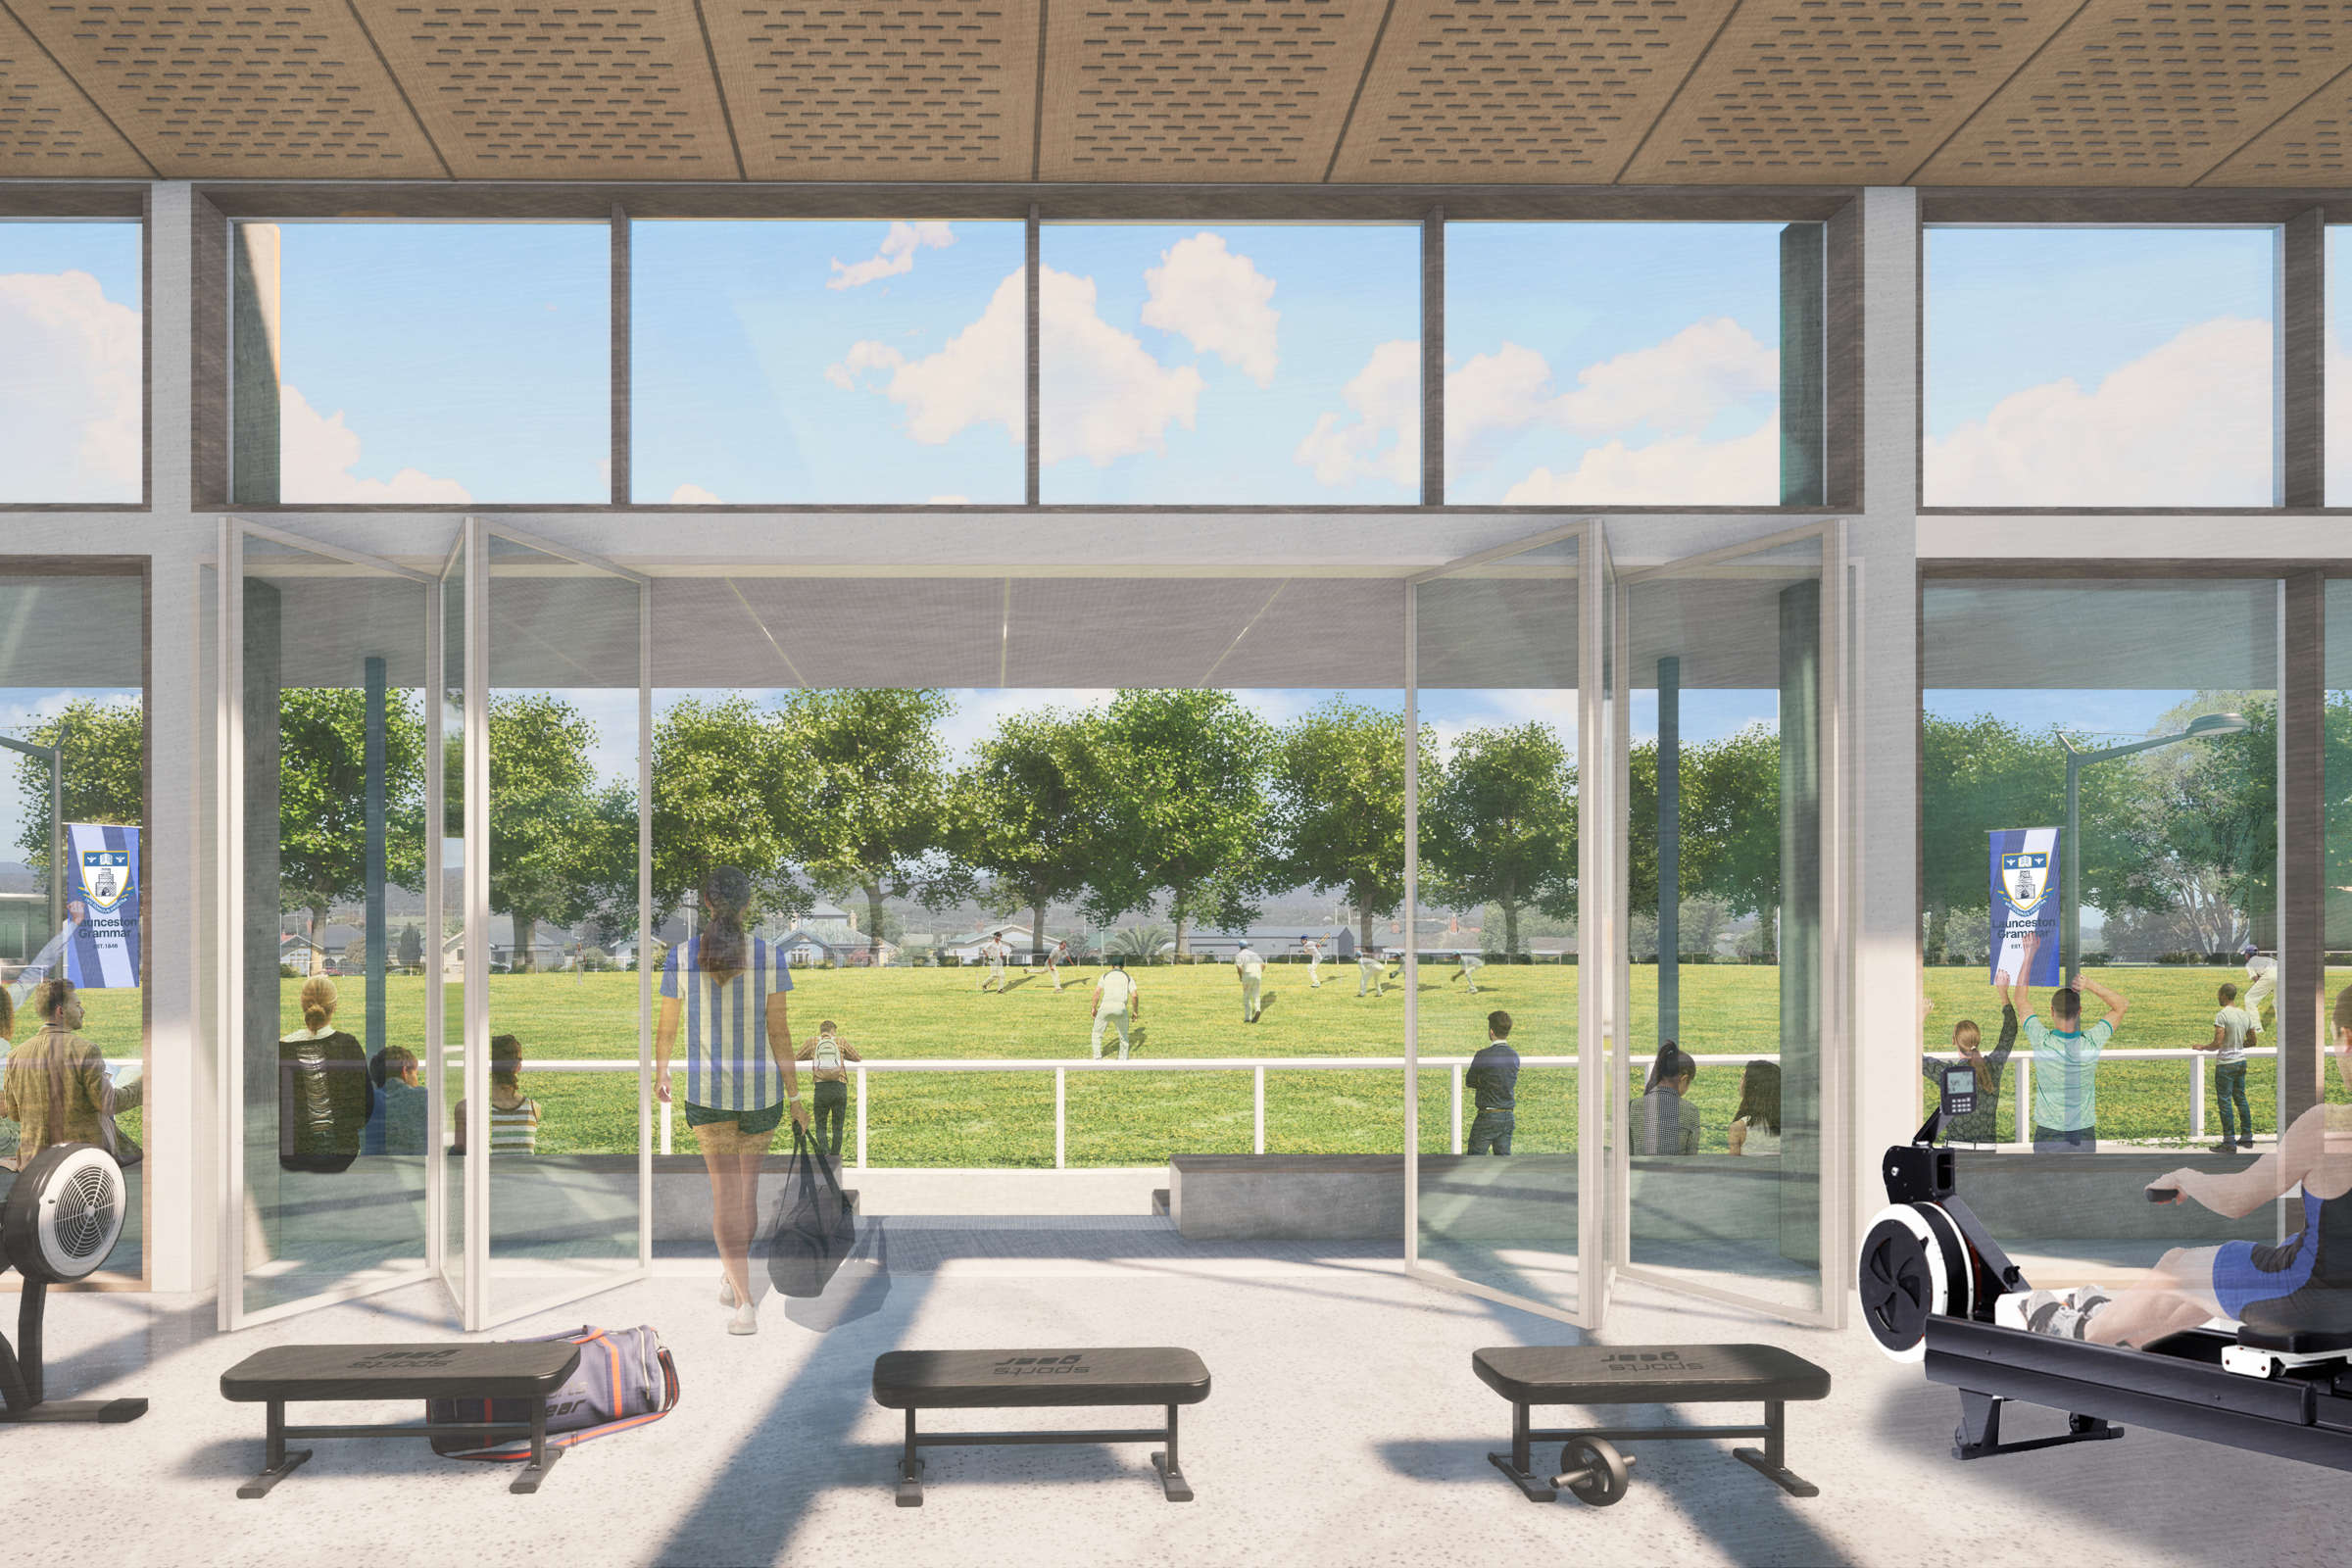 Launceston Church Grammar School Senior Campus Master Plan: Upgraded sports, health and other experiential learning facilities link to the magnificent School oval. Render by Morrison & Breytenbach Architects. Photo by Morrison & Breytenbach Architects.